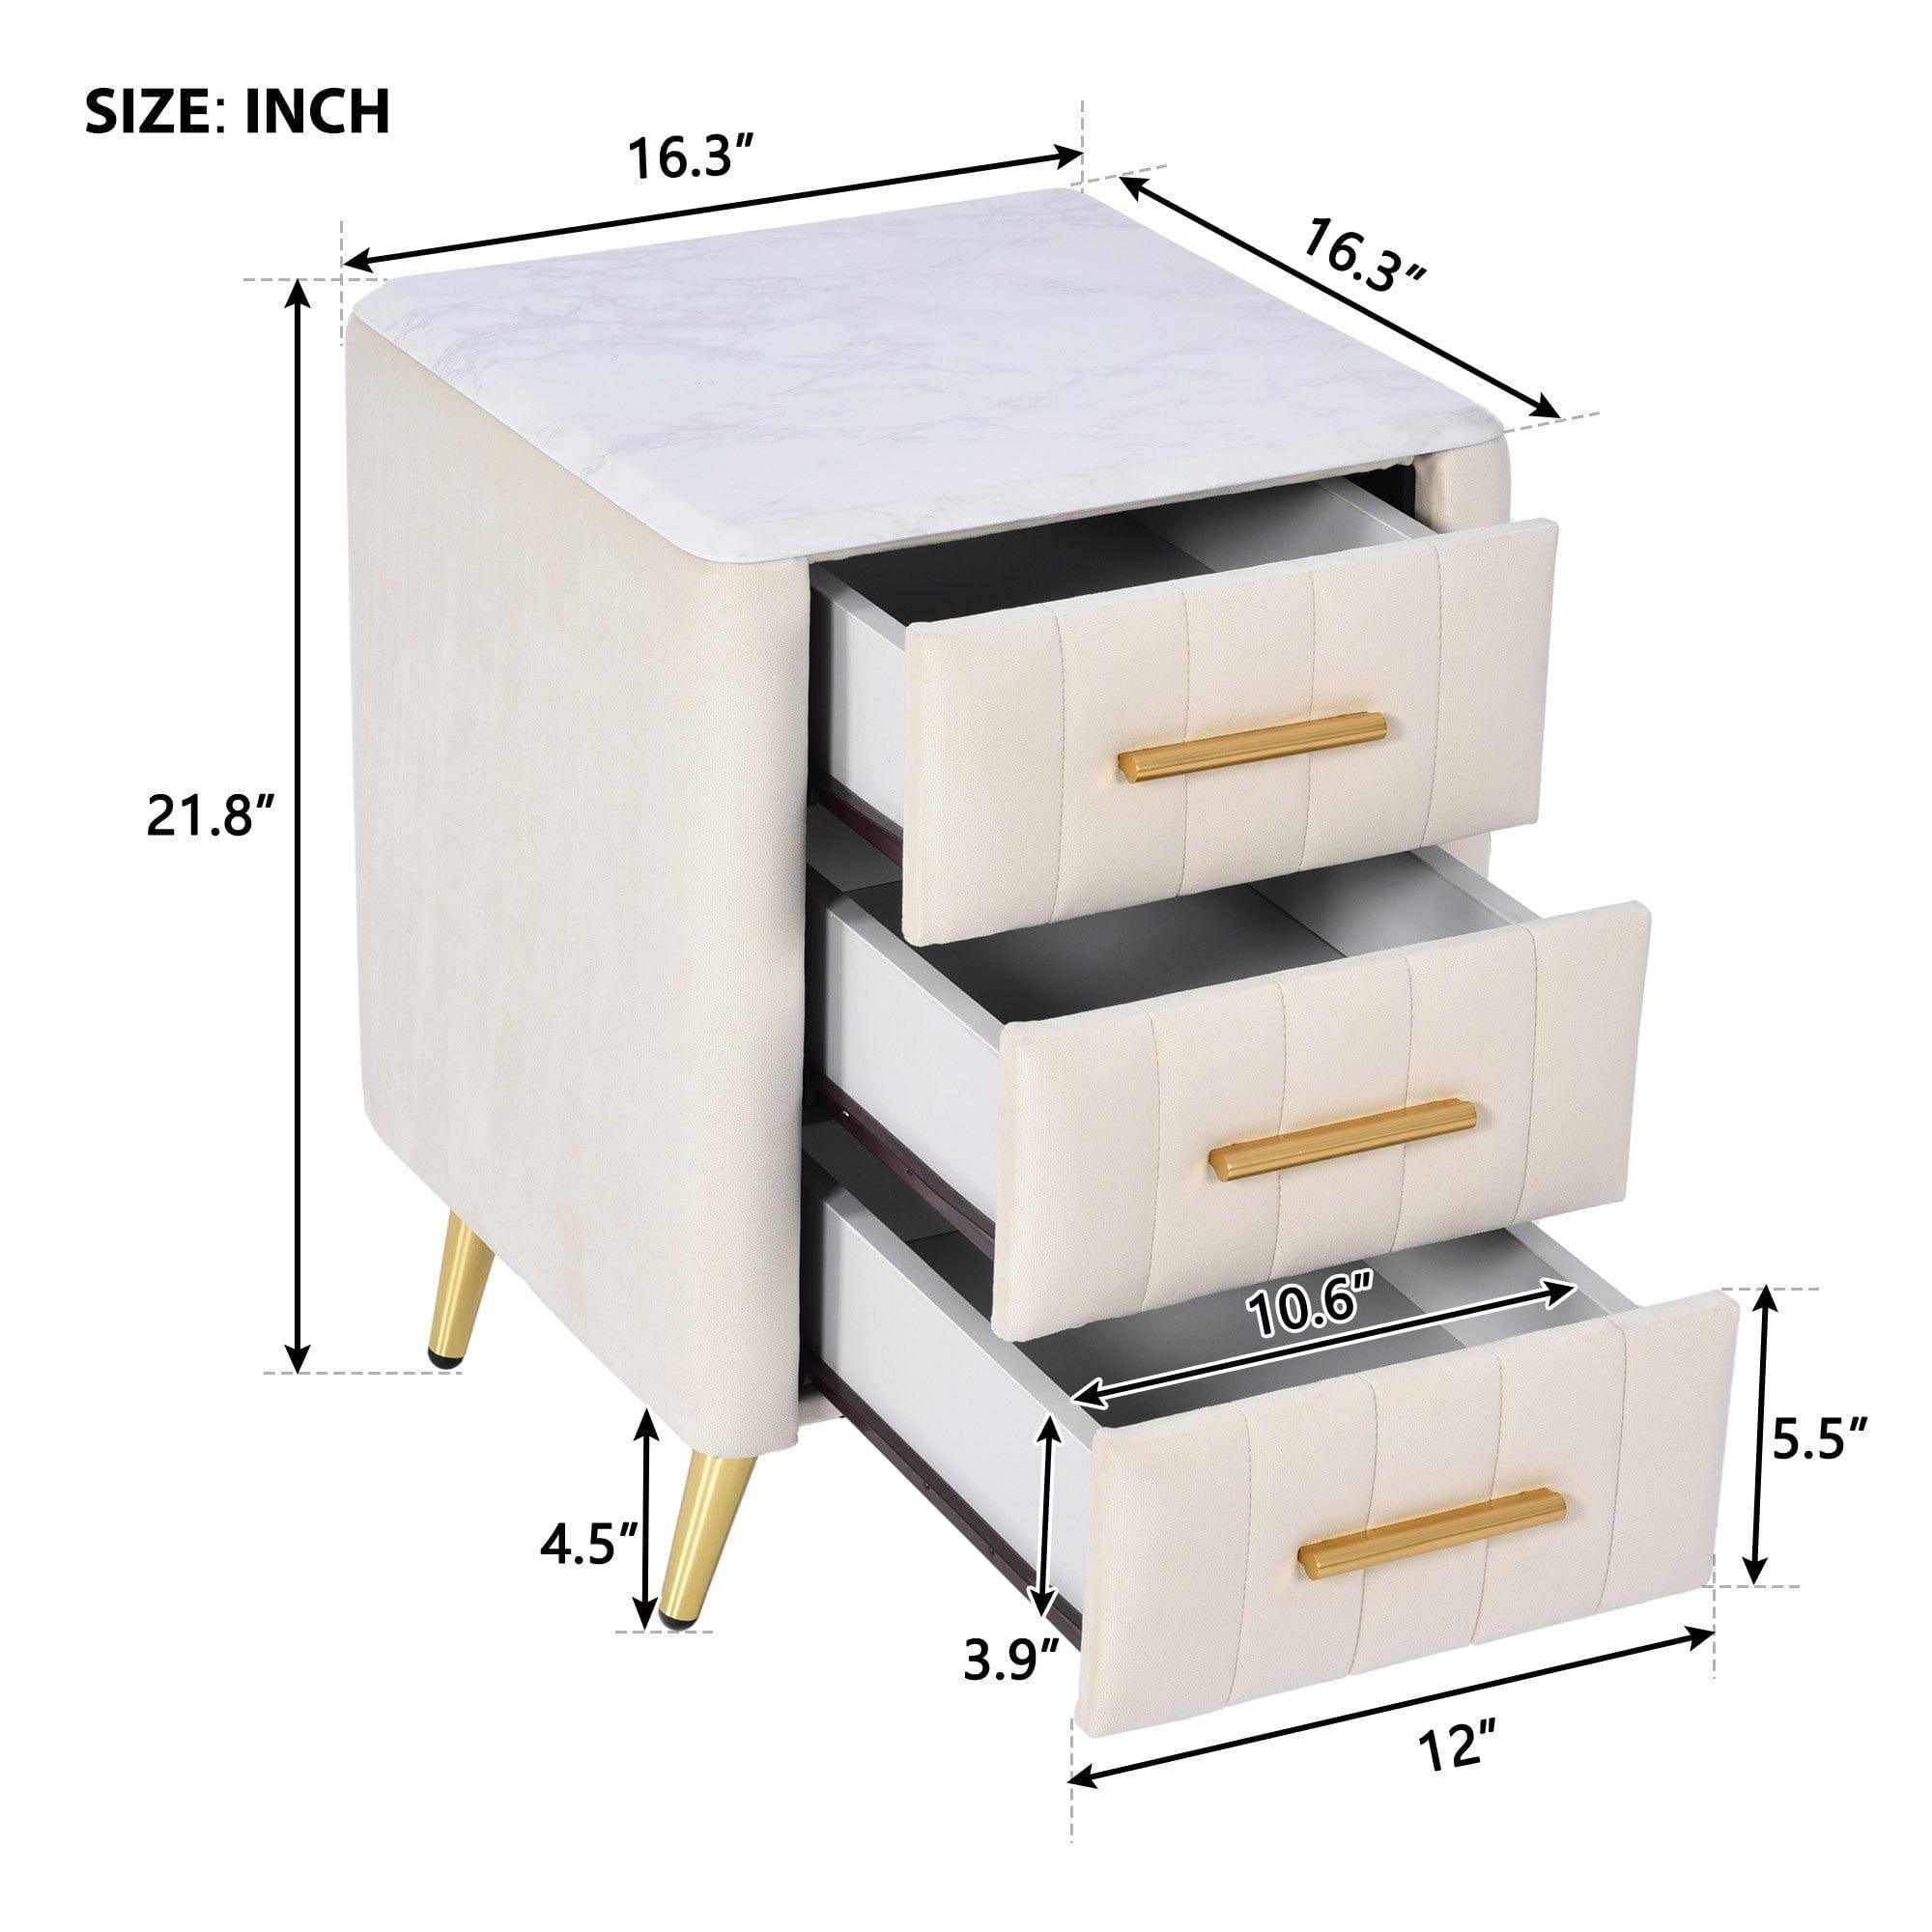 Shop Upholstered Wooden Nightstand with 3 Drawers and Metal Legs&Handles,Fully Assembled Except Legs&Handles,Bedside Table with Marbling Worktop - Beige Mademoiselle Home Decor